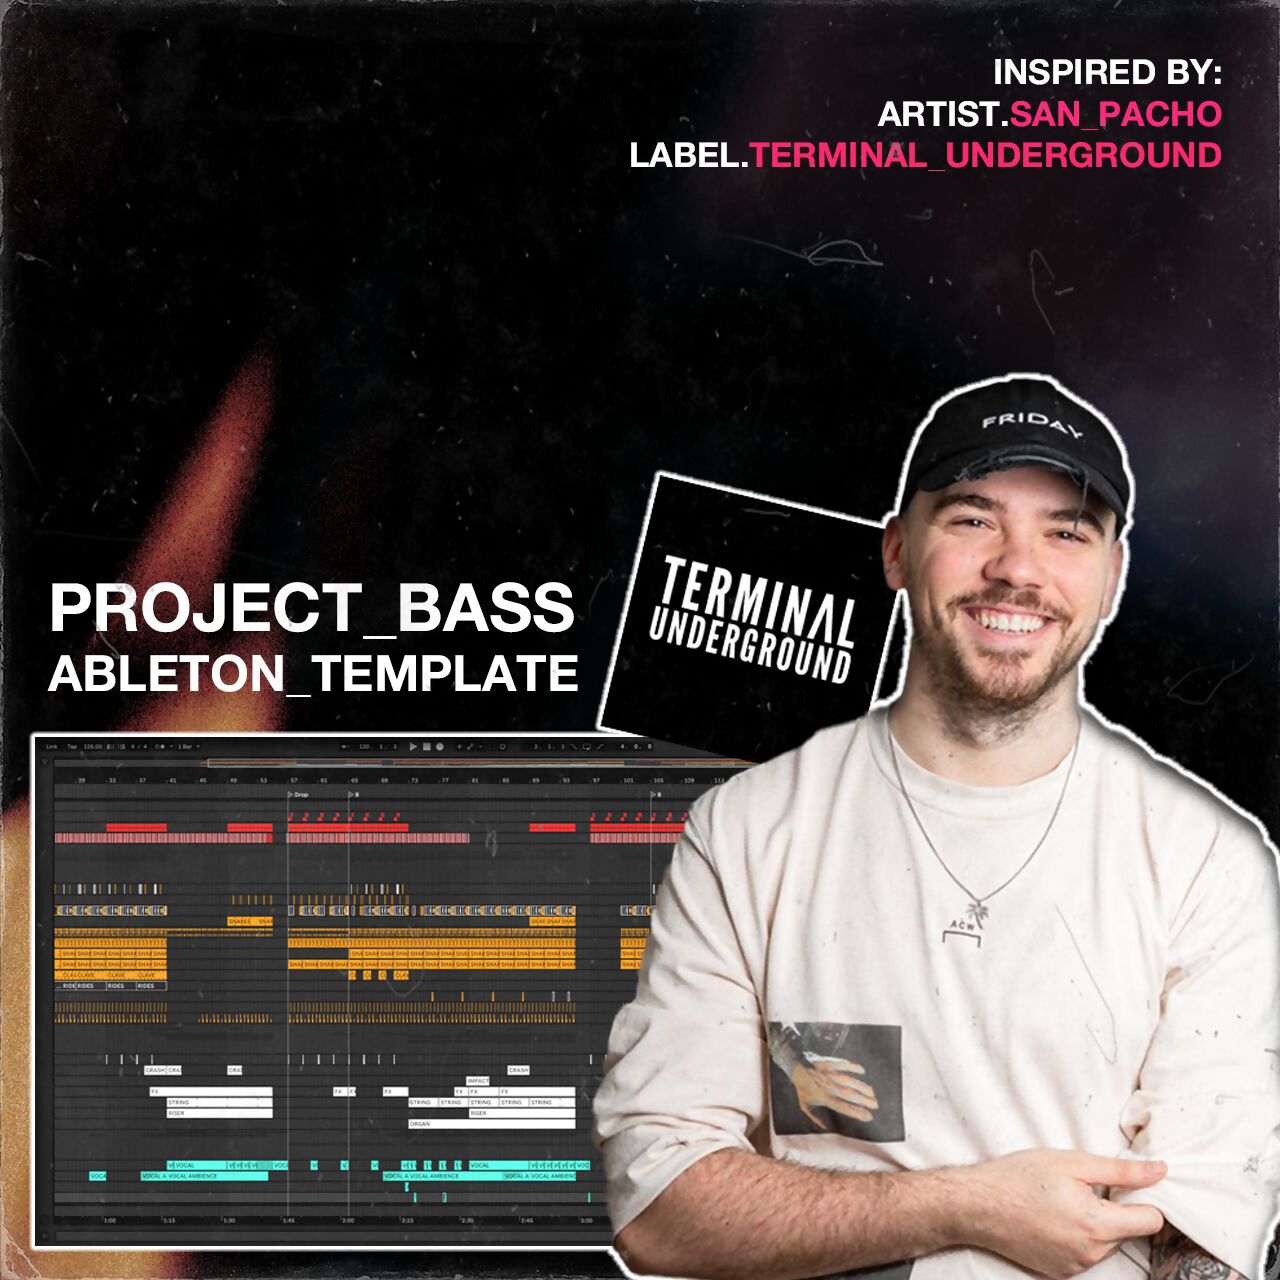 San Pacho inspired Ableton Template - project_bass - Tunebat Marketplace